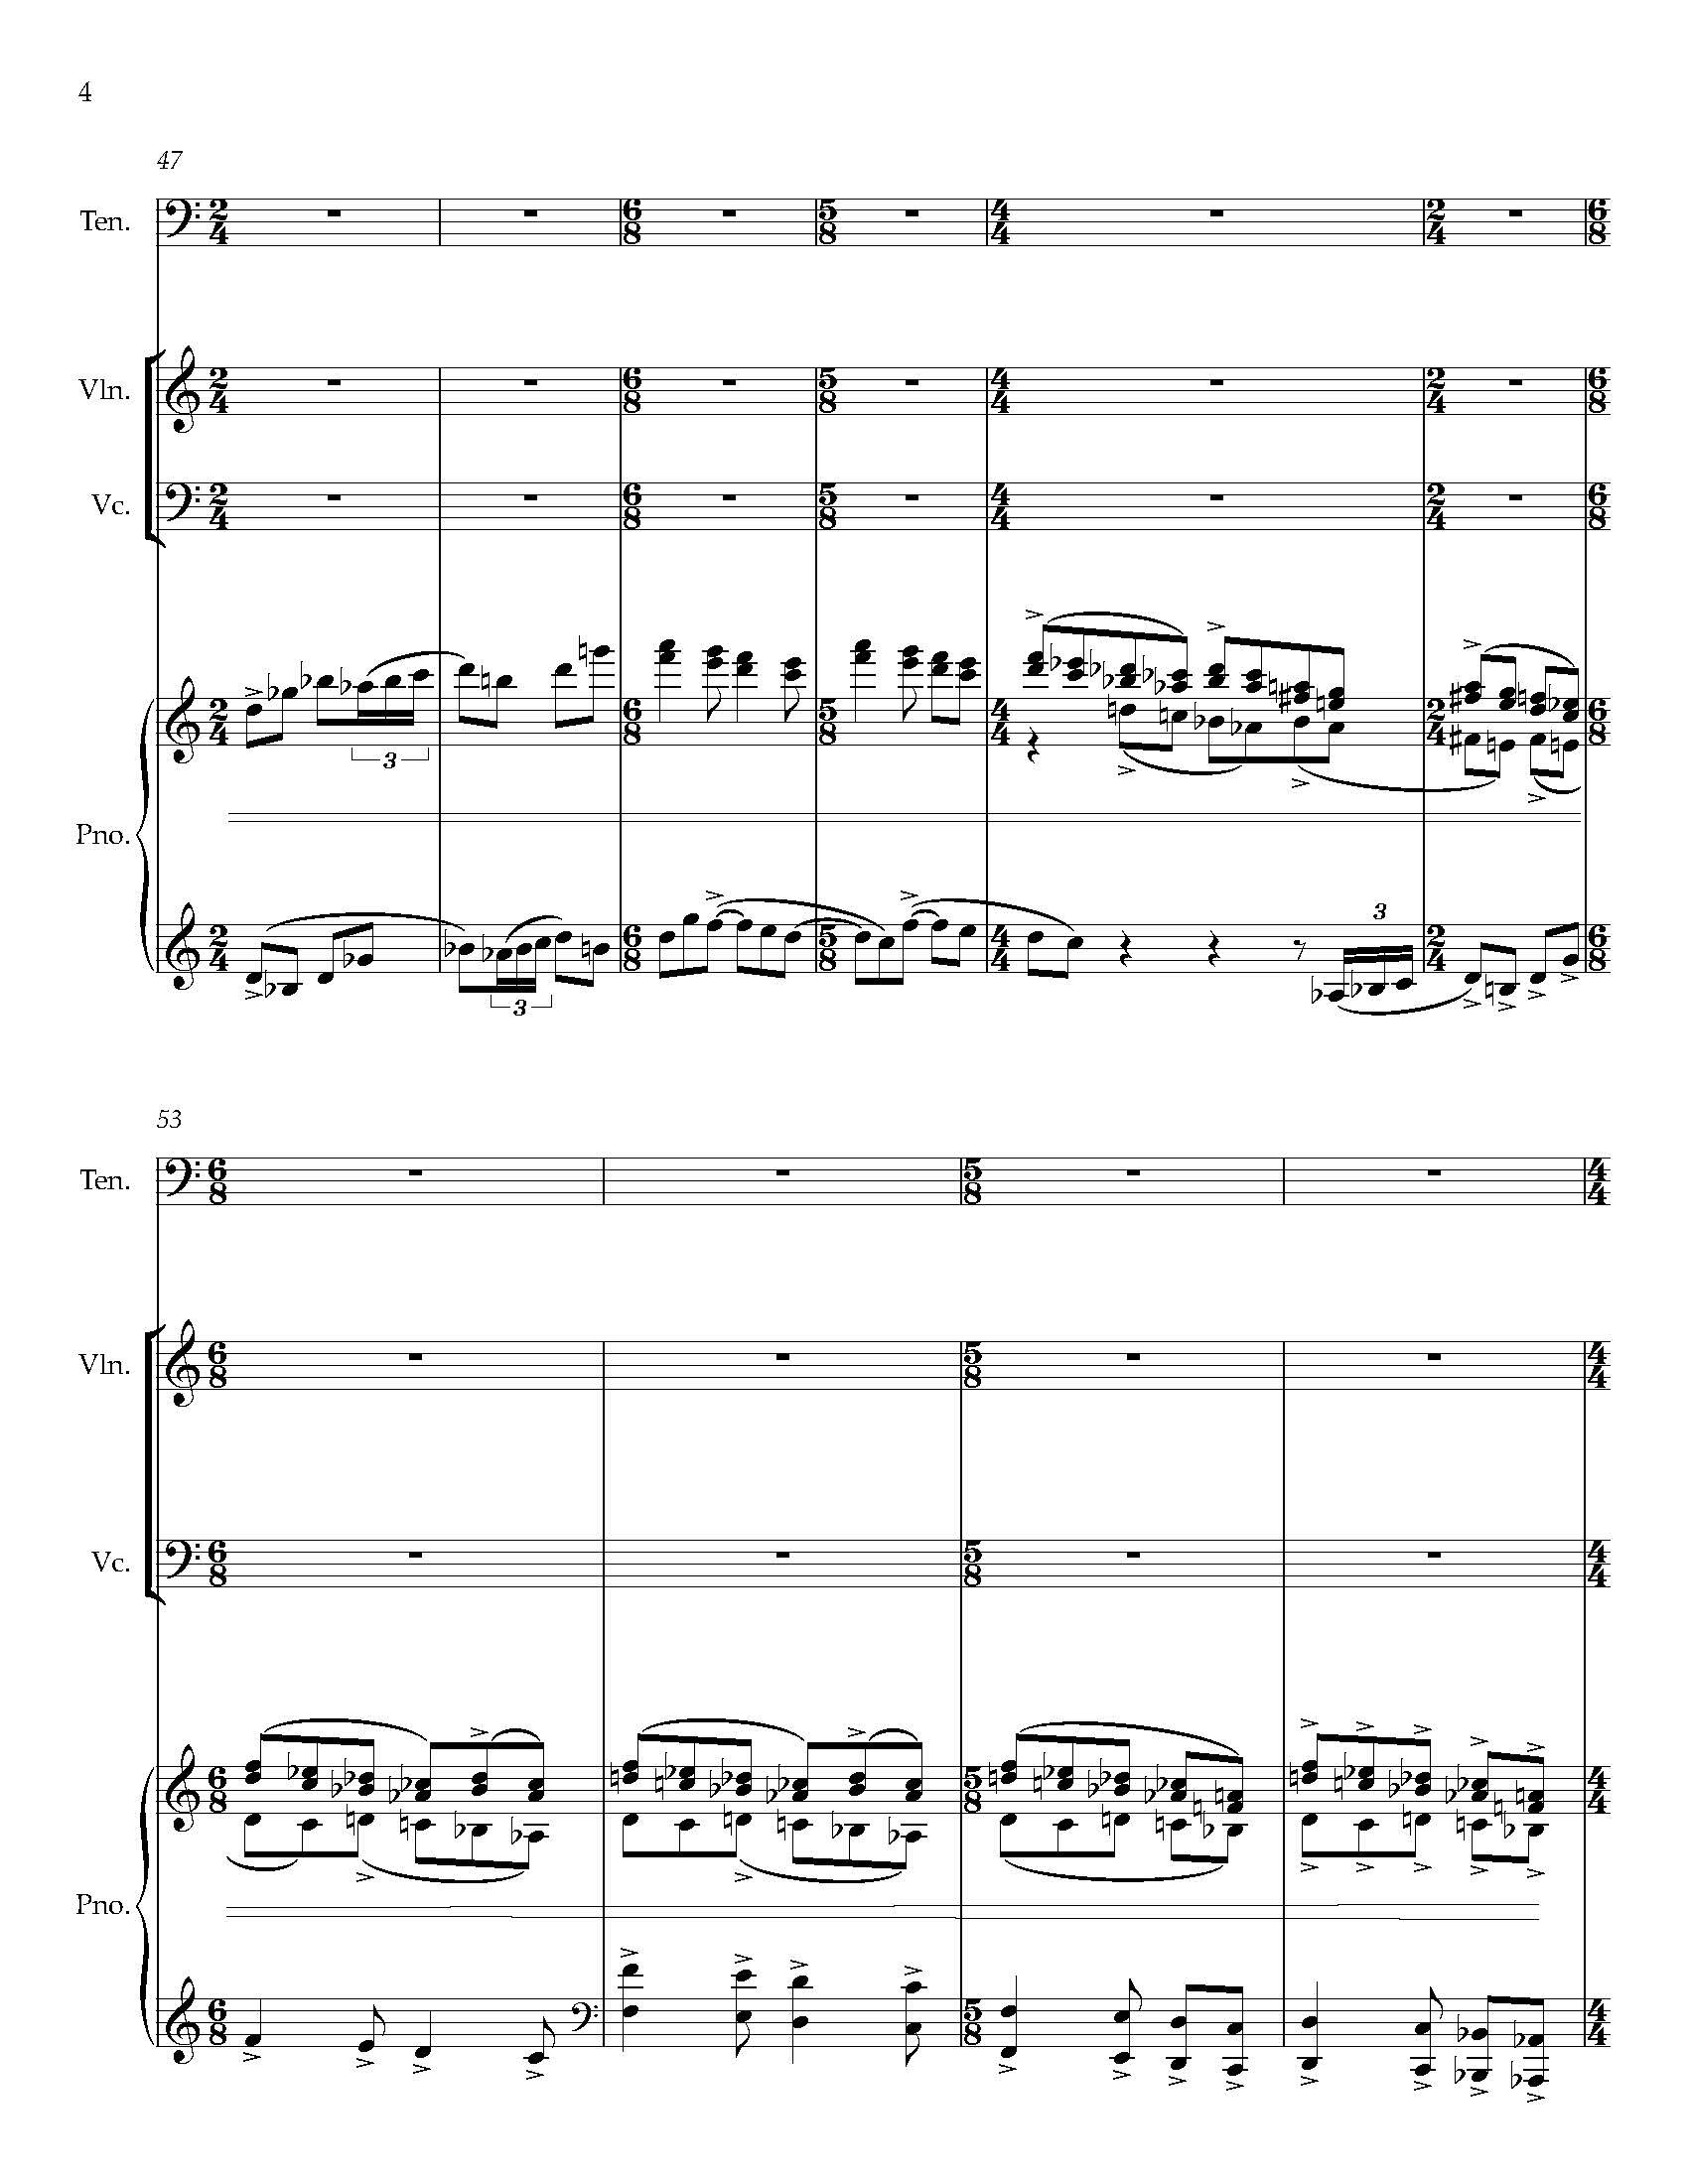 Gursky Songs - Complete Score_Page_12.jpg